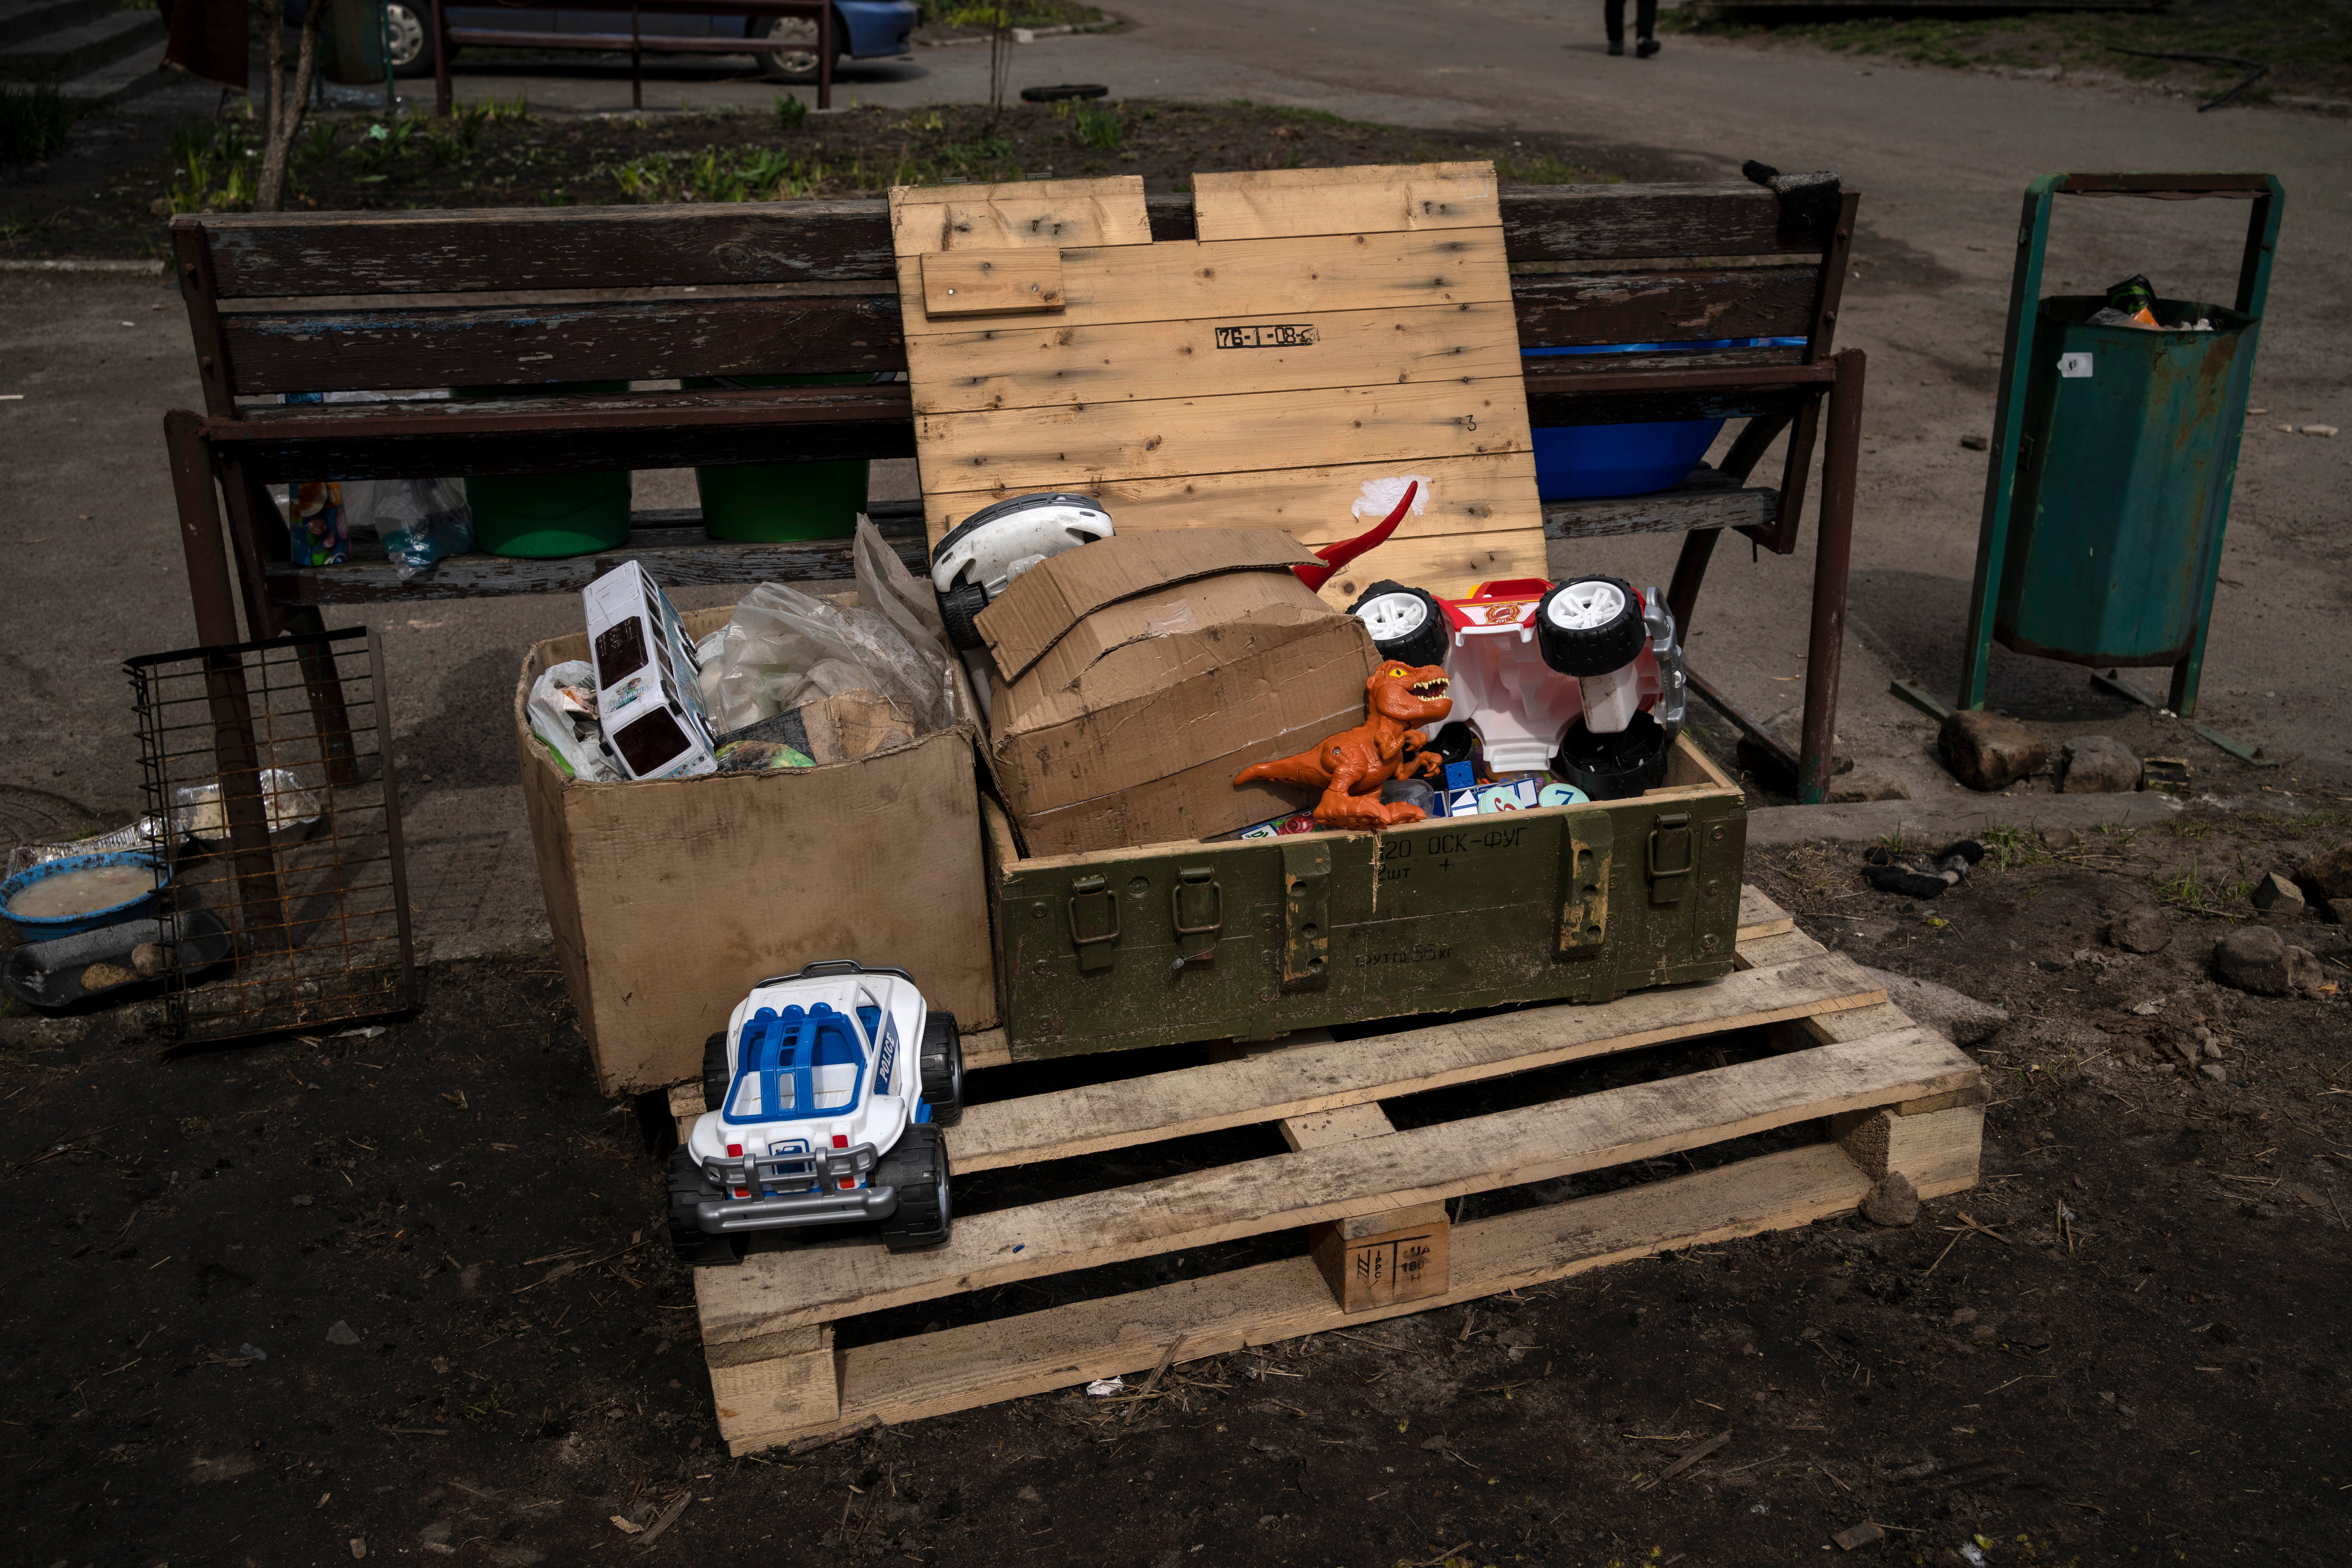 Children's toys are stored inside a box for military ammunition in Bucha, on the outskirts of Kyiv, Ukraine